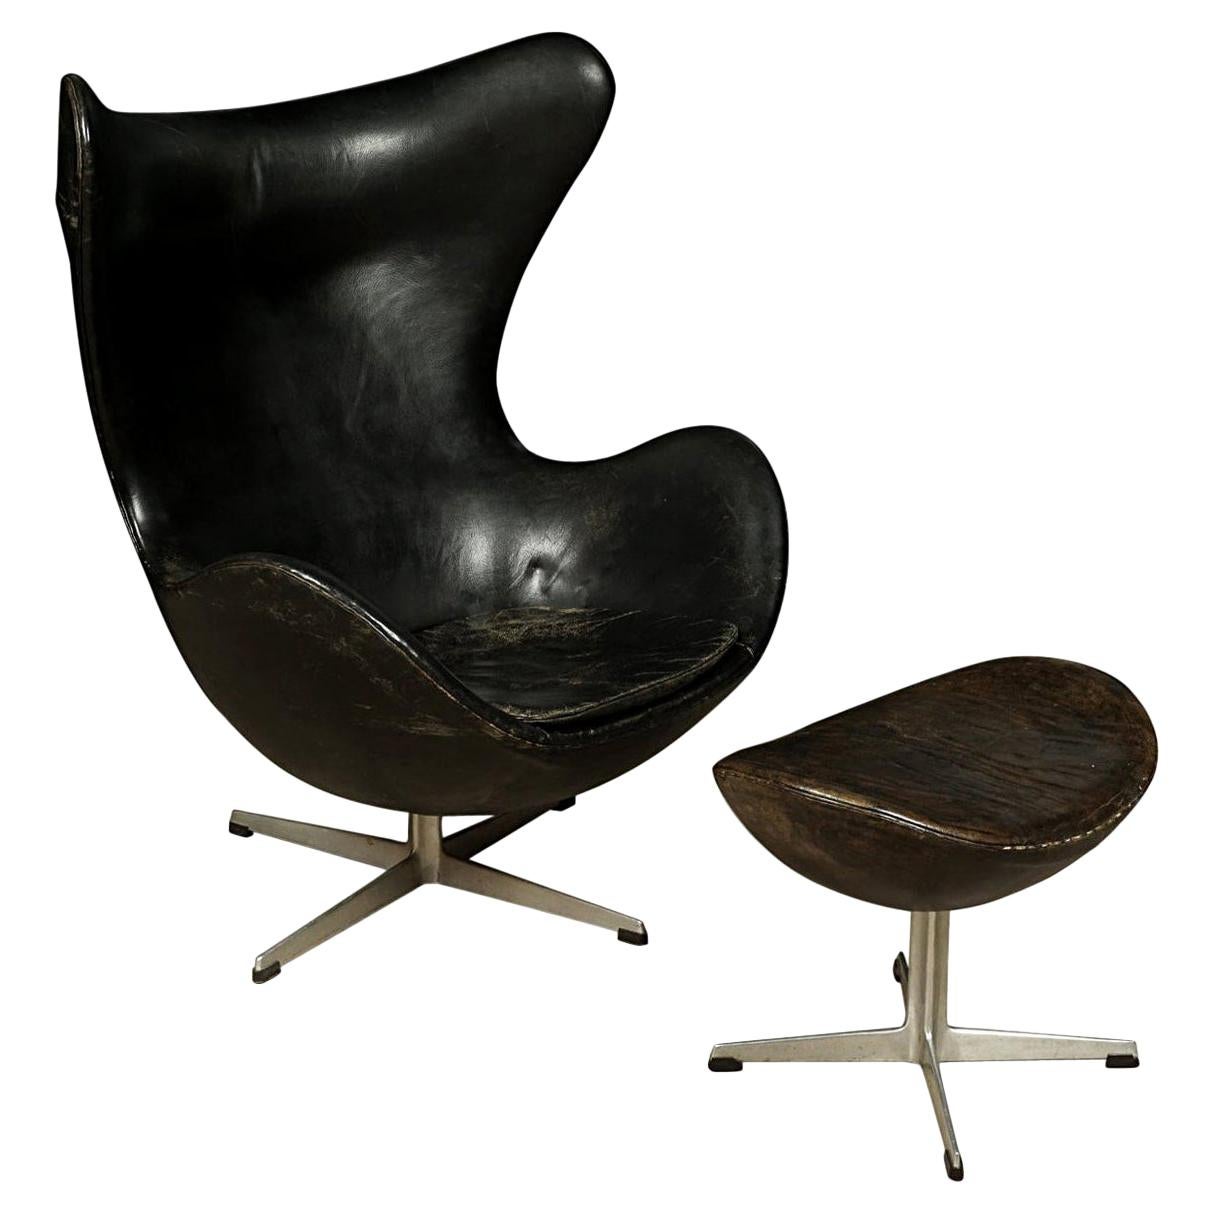 Vintage Arne Jacobsen "The Egg" Chair in Original Leather, with Ottoman, 1963